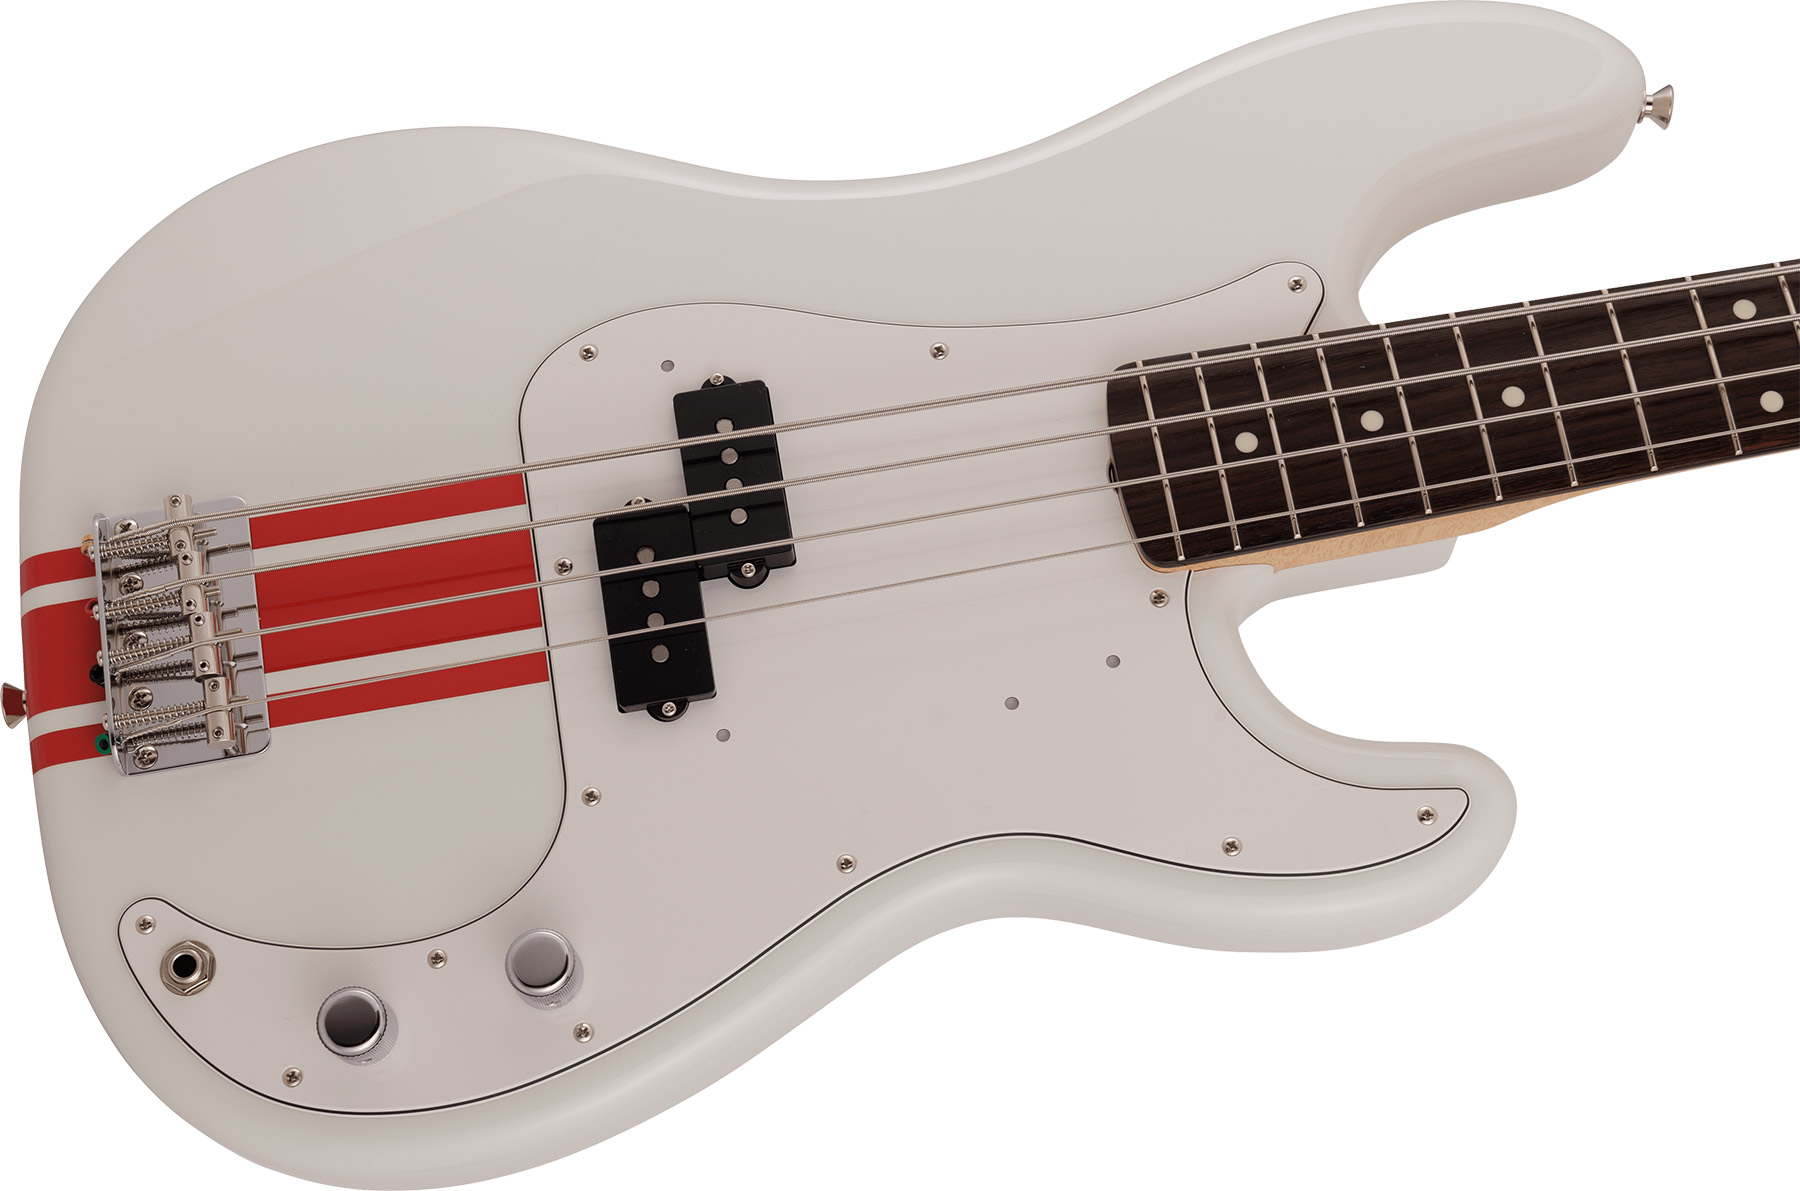 Fender Precision Bass Traditional 60s Mij Jap Rw - Olympic White W/ Red Competition Stripe - Basse Électrique Solid Body - Variation 2